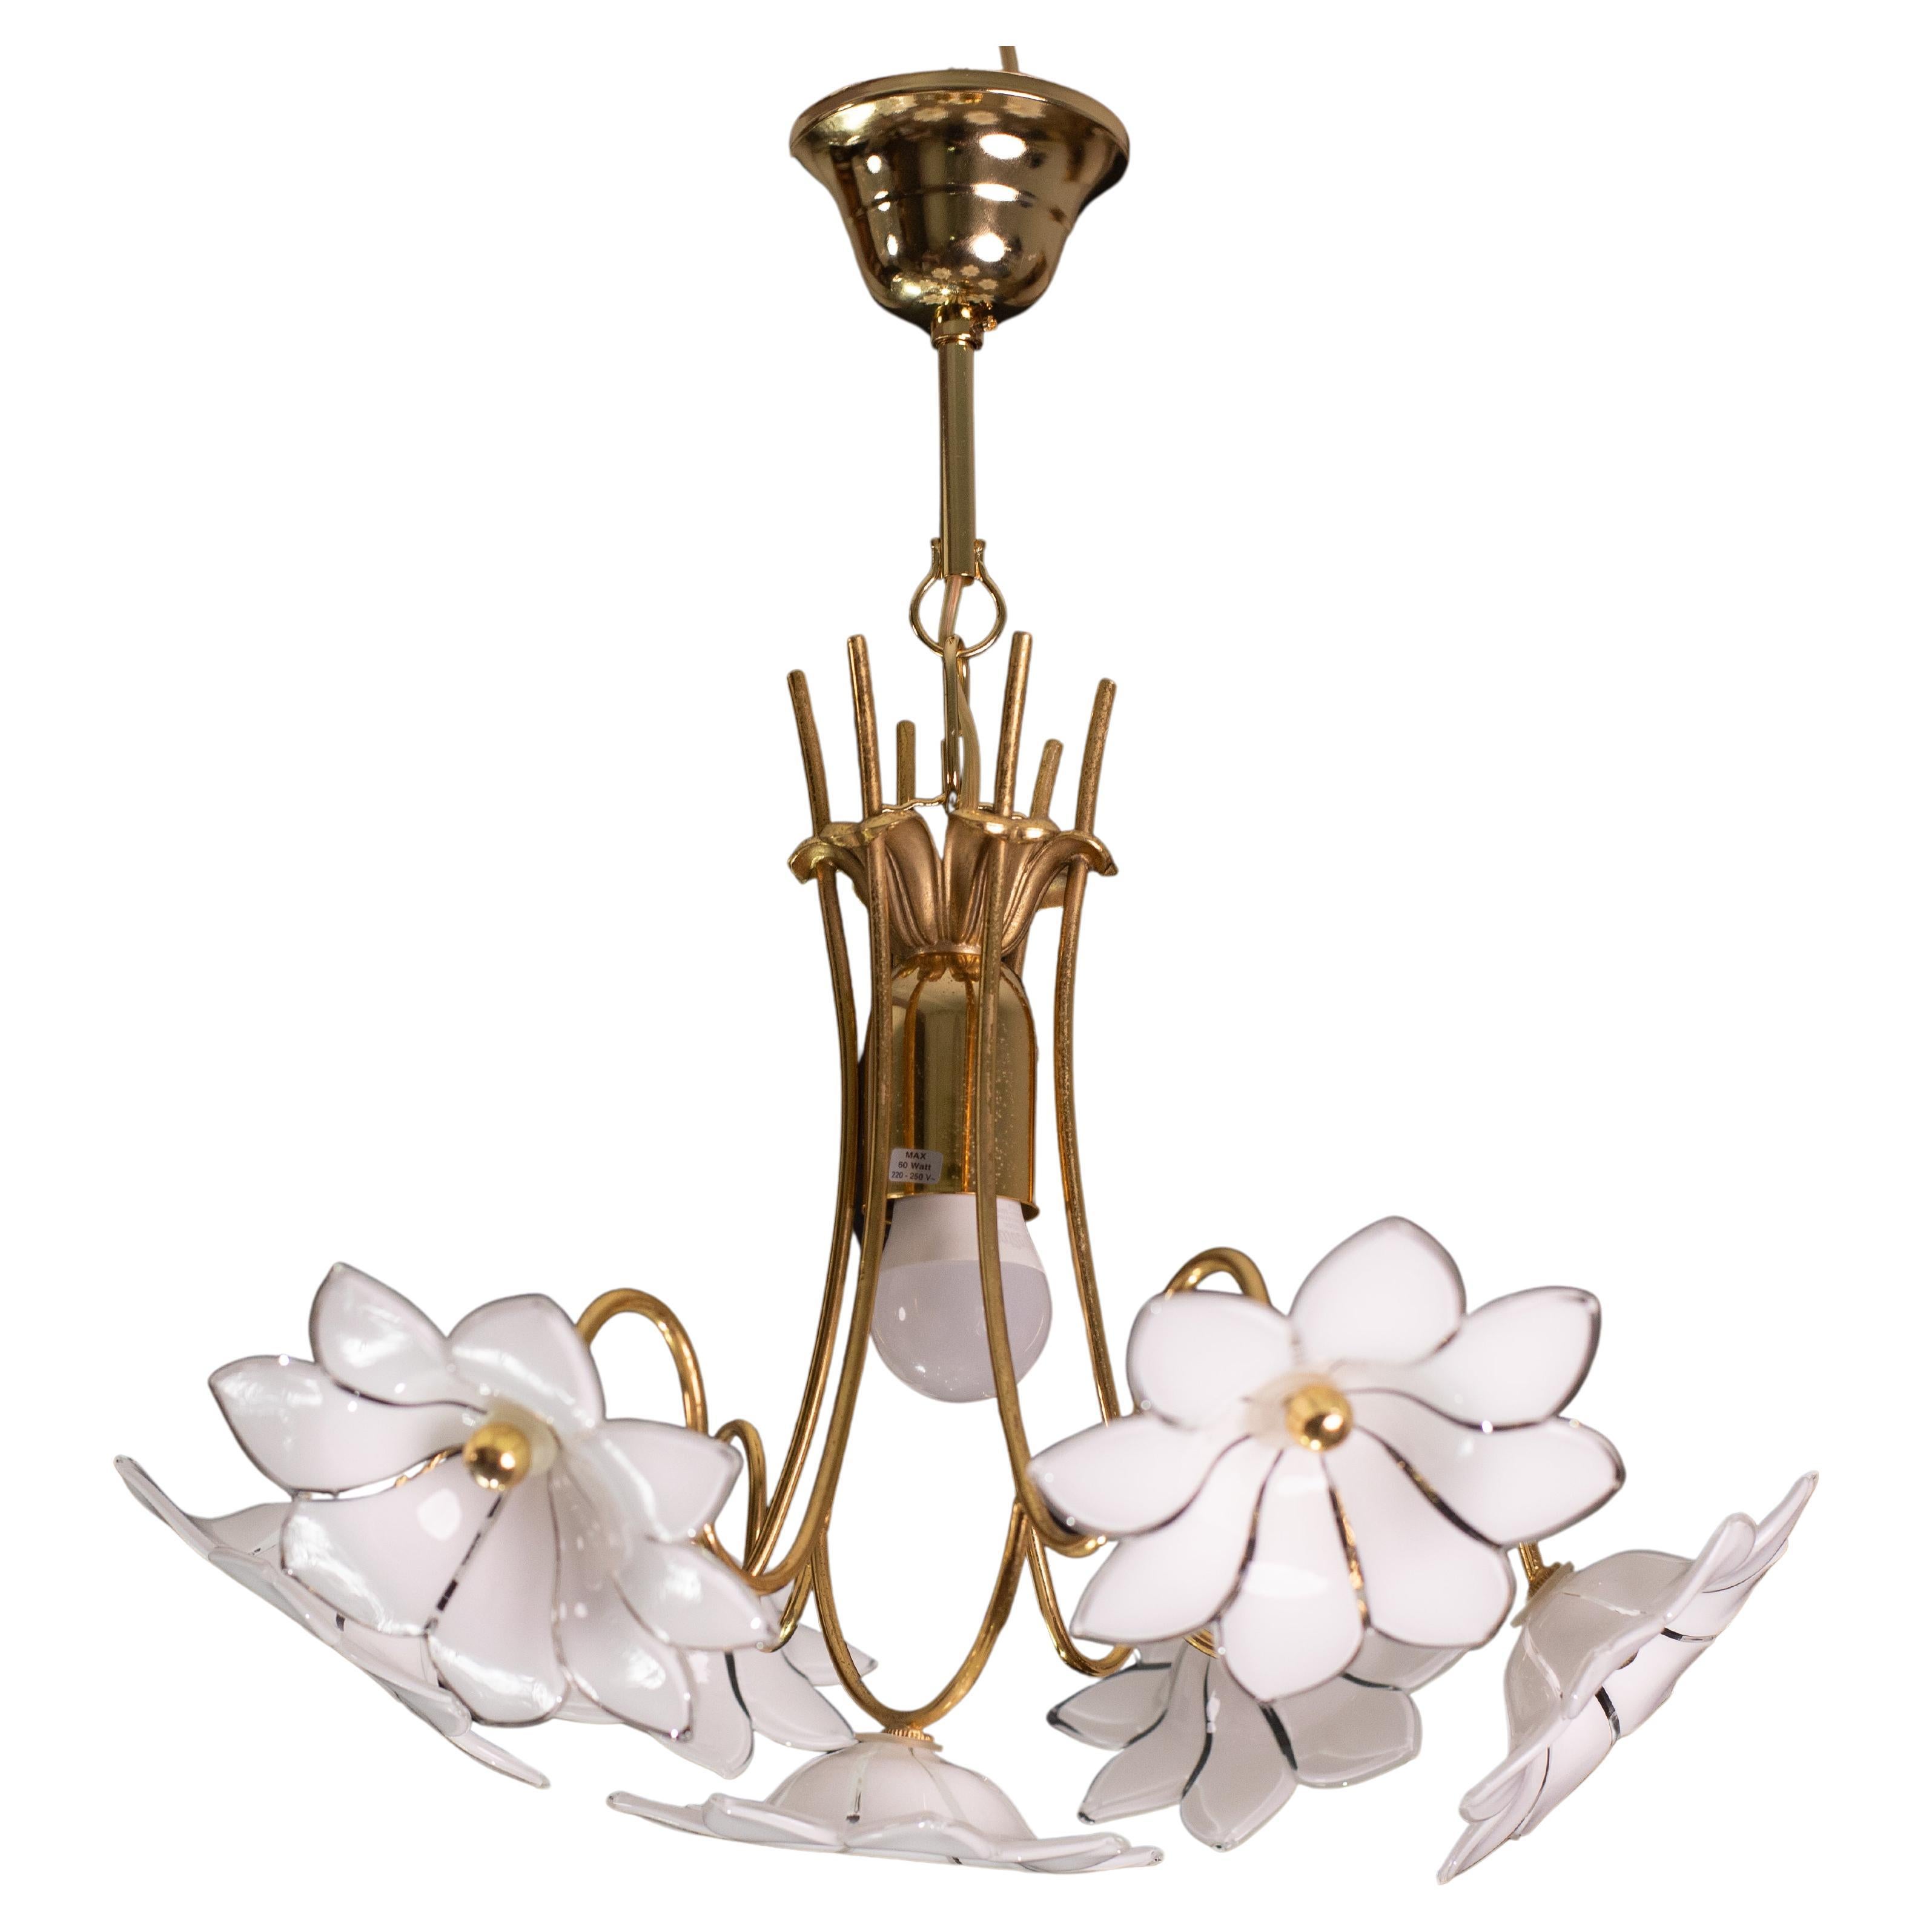 Petite Murano Vintage Chandelier White Flowers, 1970 For Sale